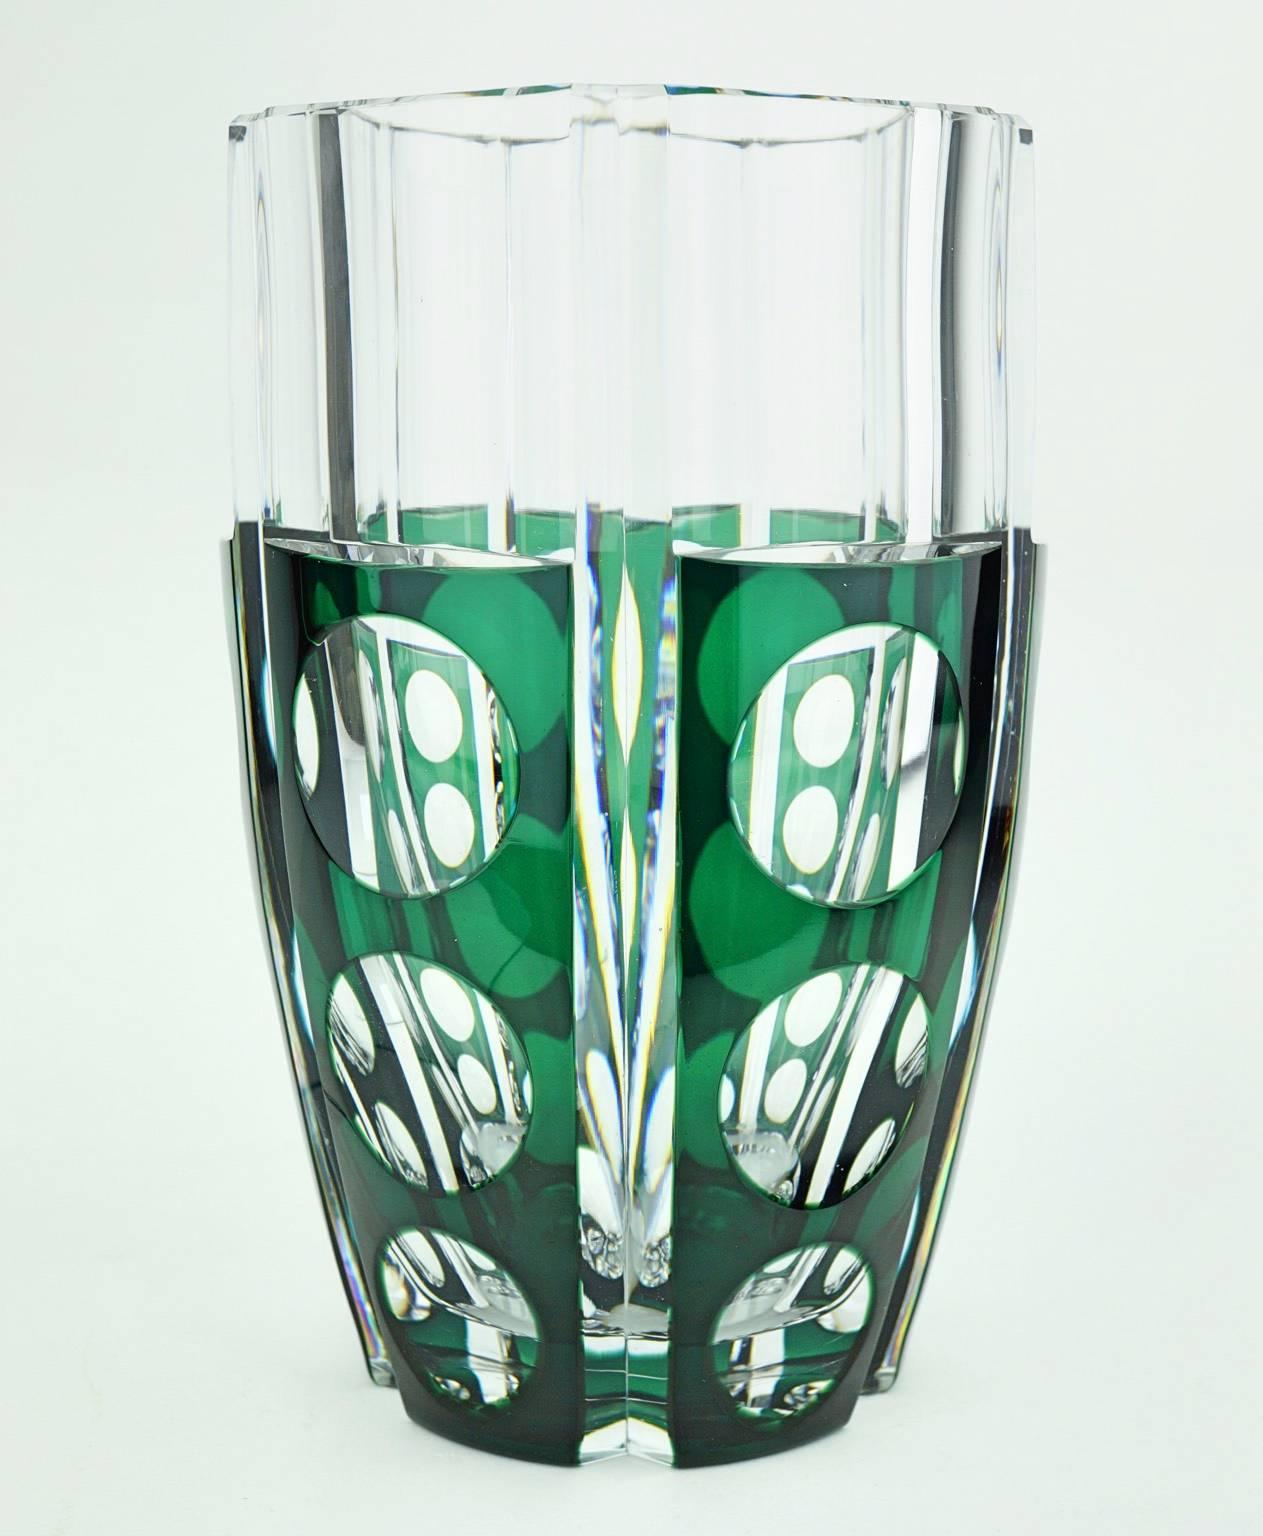 Hexagonal large Art Deco vase in thick glass flashed in emerald green color. “Cerbere” design by Charles Graffart (1883-1967), signed 